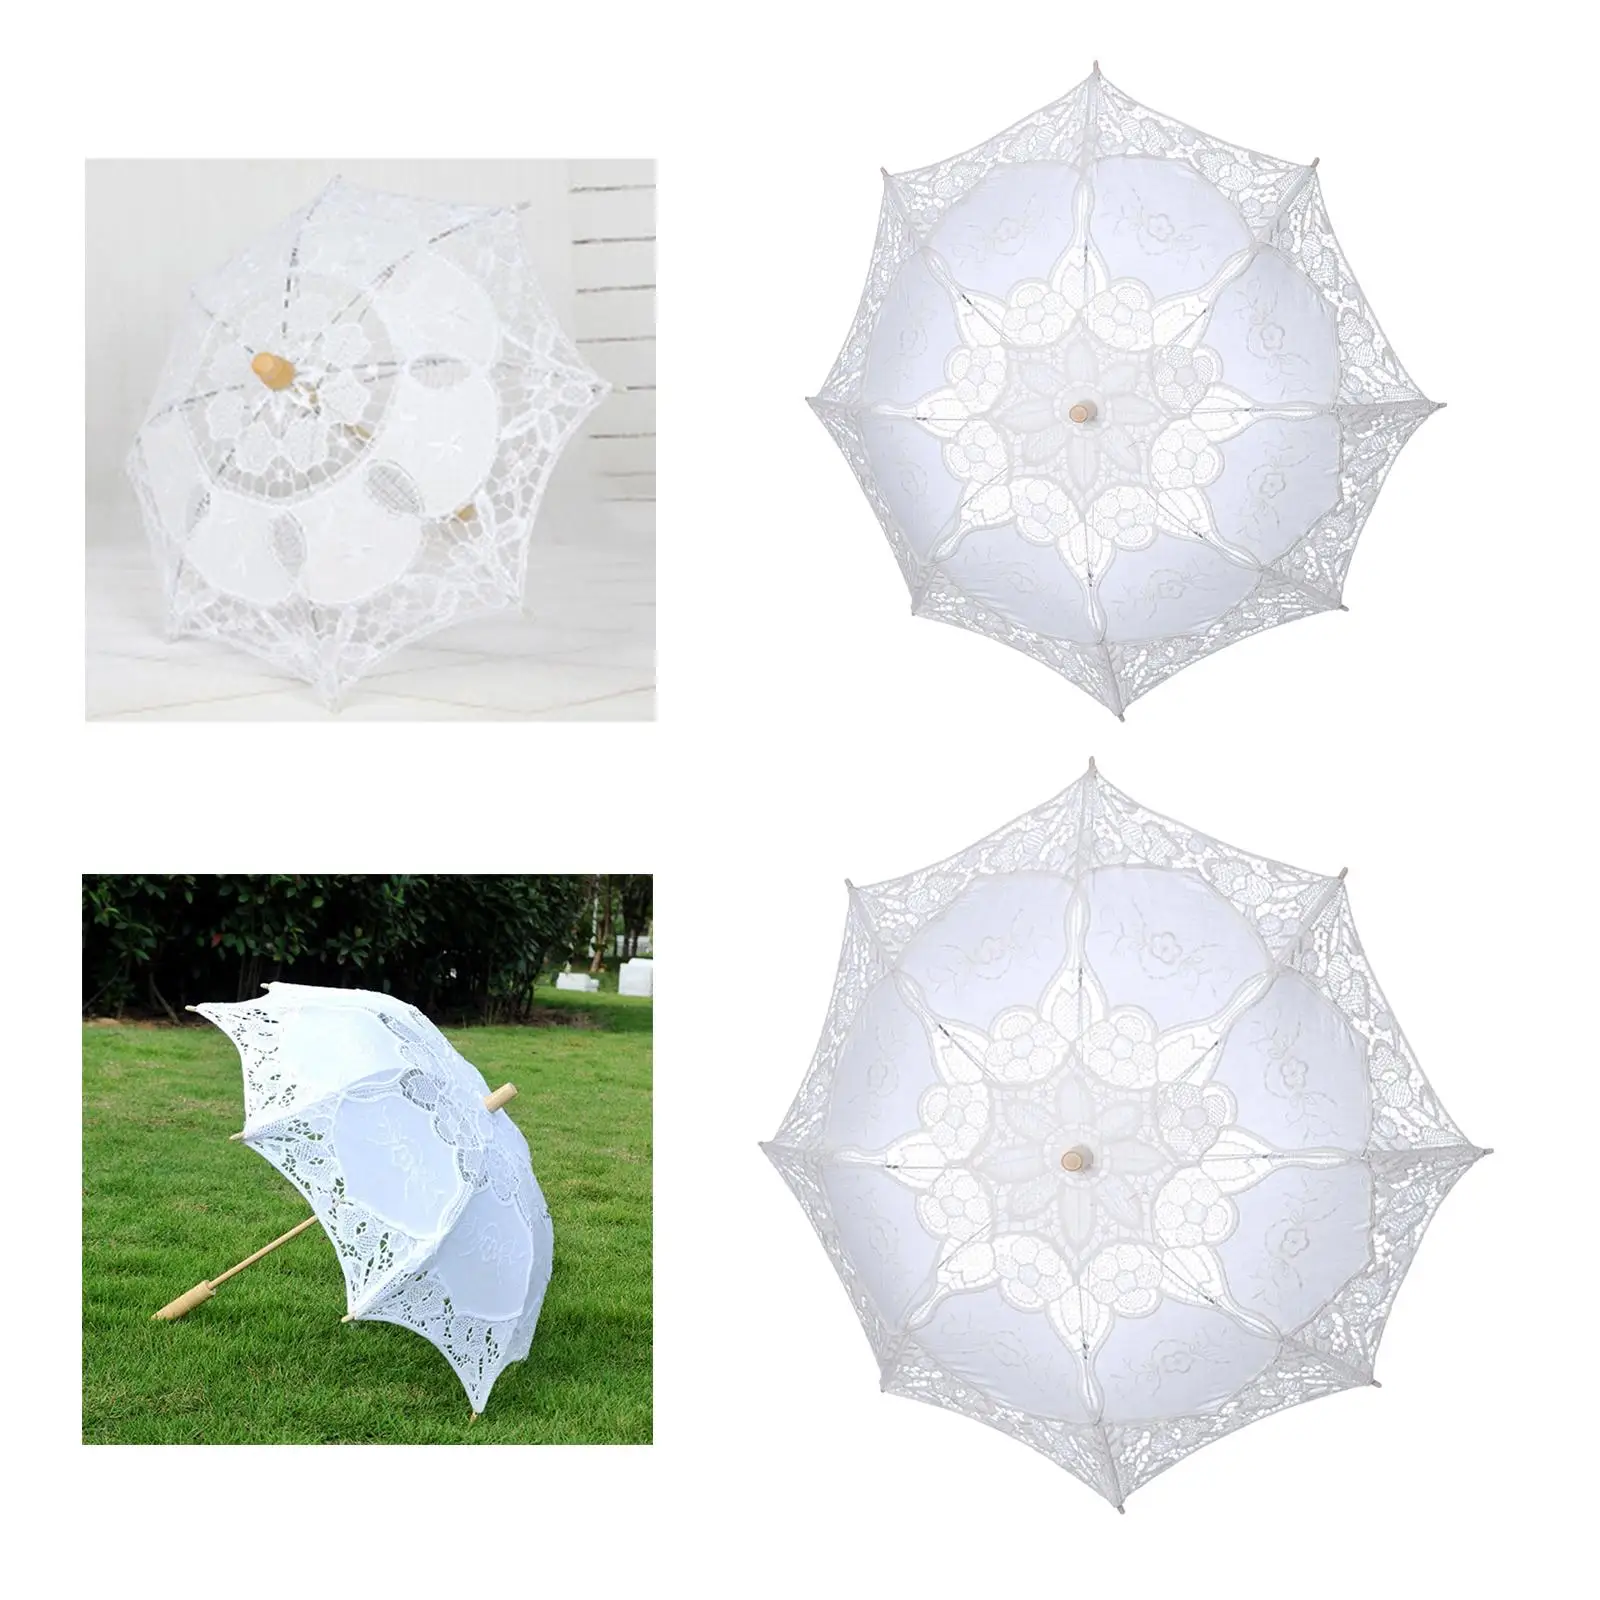 Lace Umbrella Decor Western  for Photography Prop Bridal Party